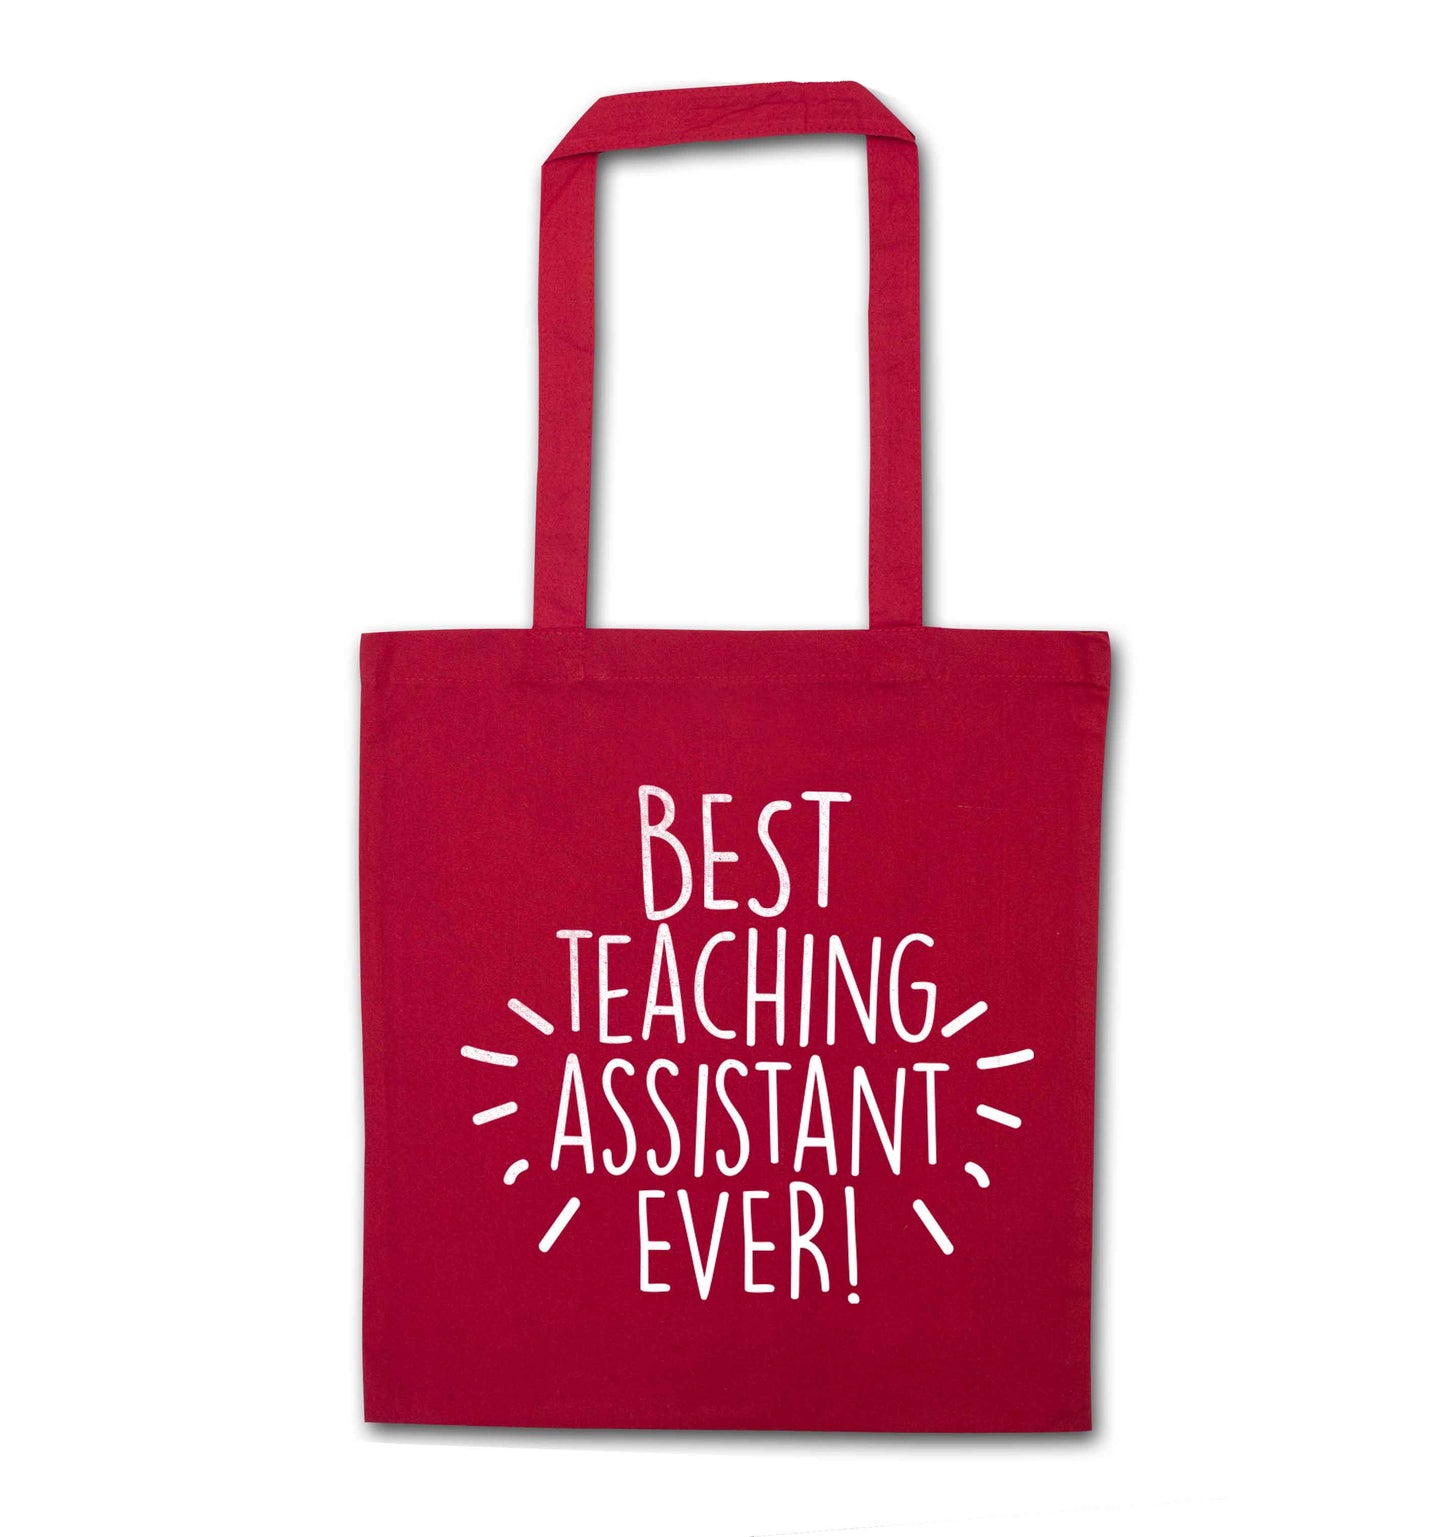 Best teaching assistant ever! red tote bag